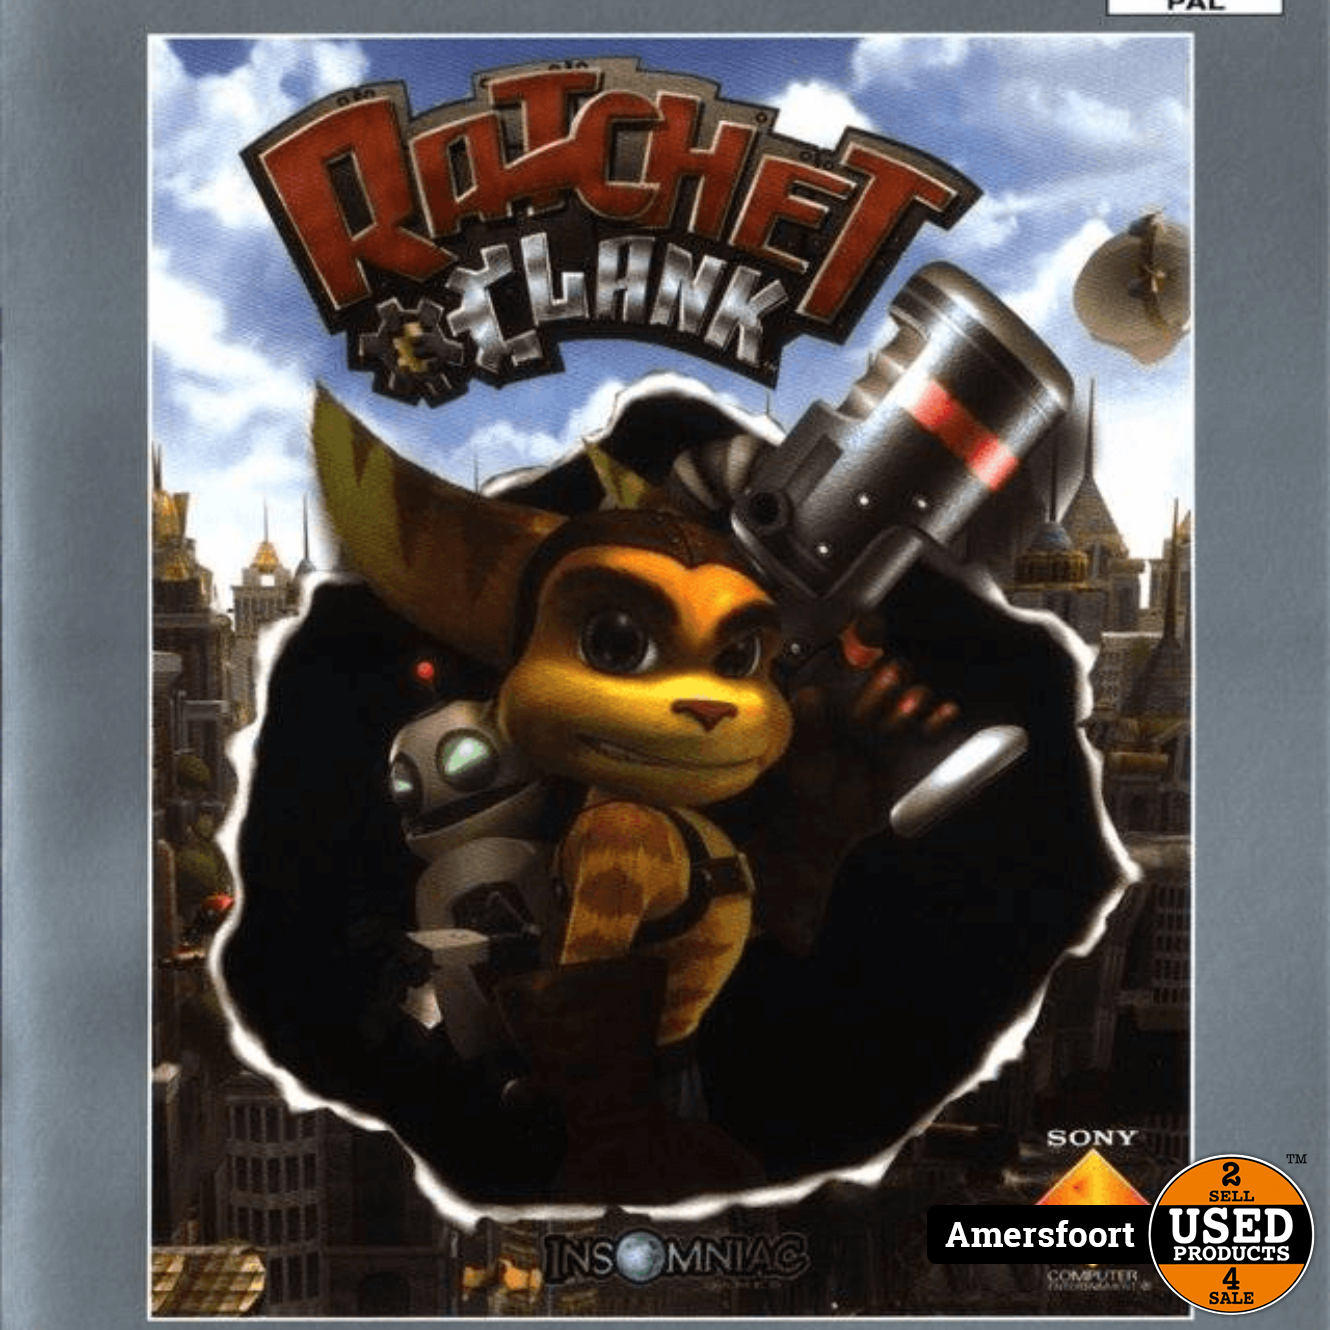 Een zin Discreet is er PS2 Ratchet &amp; clank Playstation 2 - Used Products Amersfoort